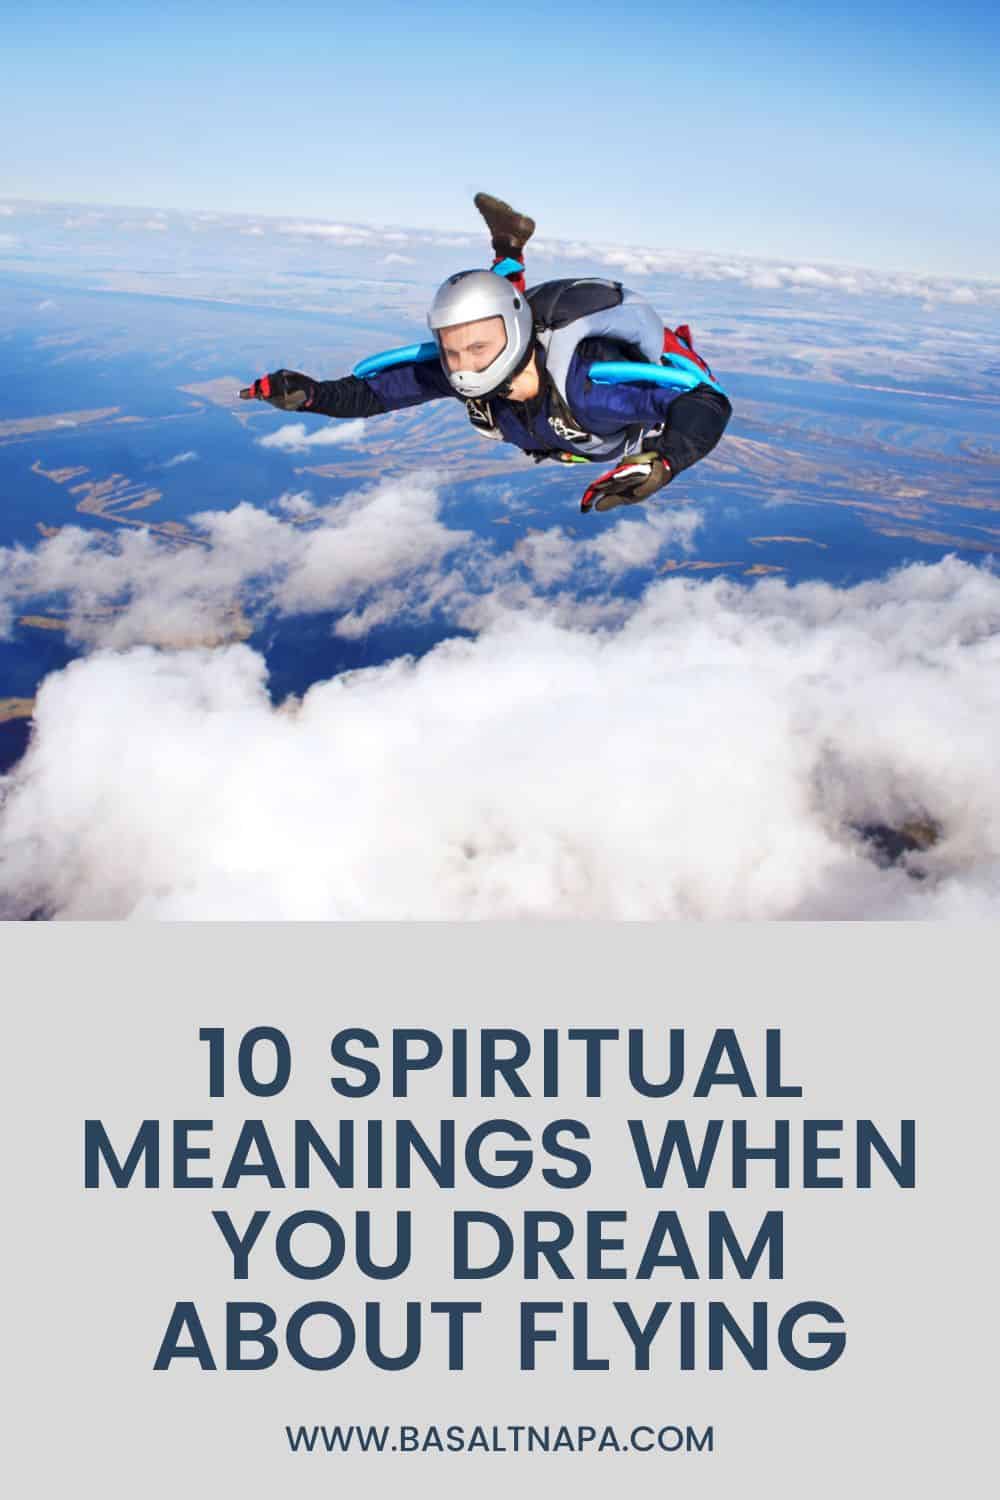 Spiritual Meanings When You Dream About Flying